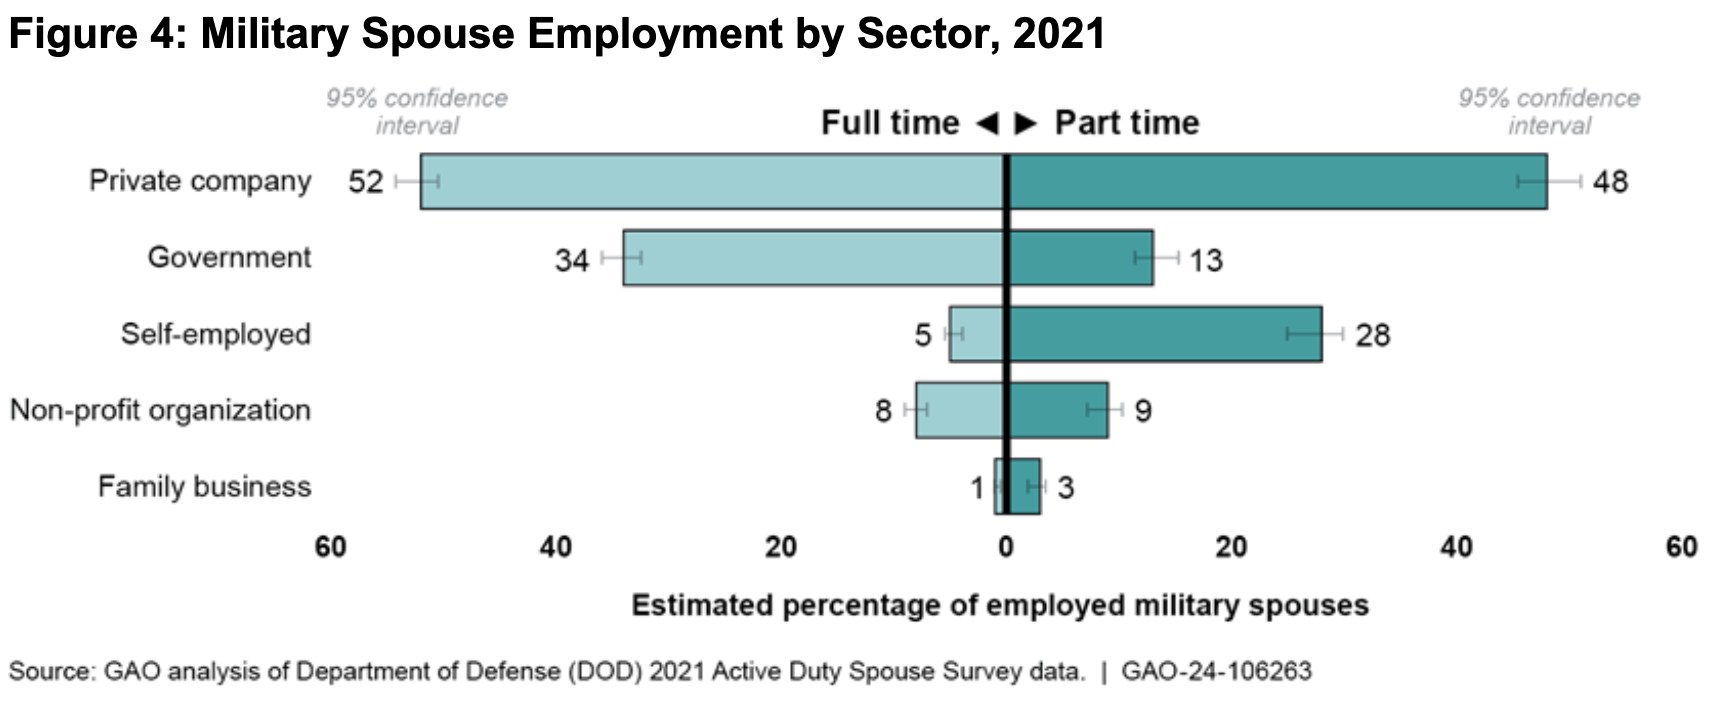 GAO Report | Figure 4: Military Spouse Employment by Sector, 2021